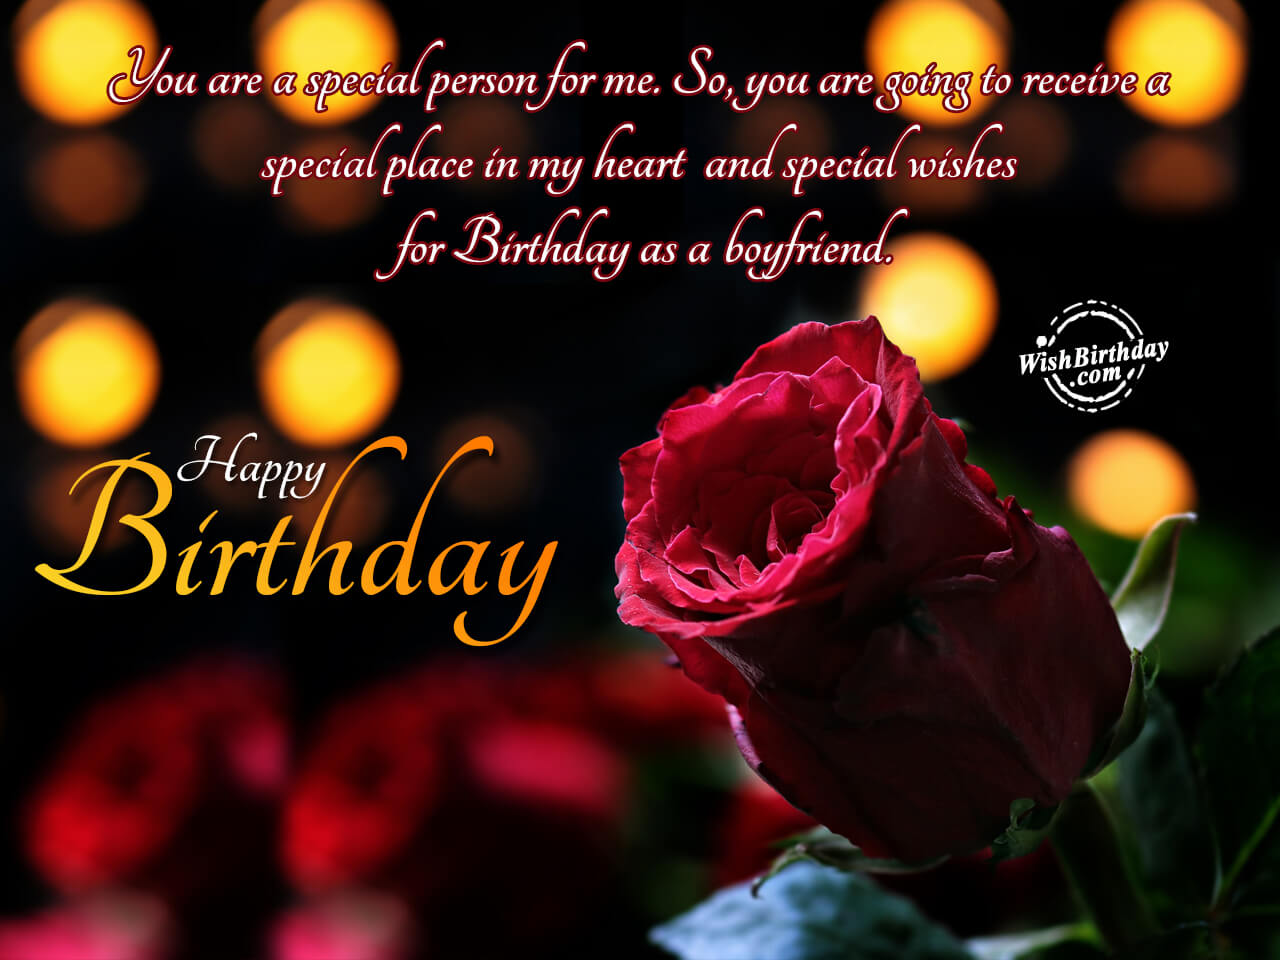 You are a special person for me, Happy Birthday - Birthday Wishes ...